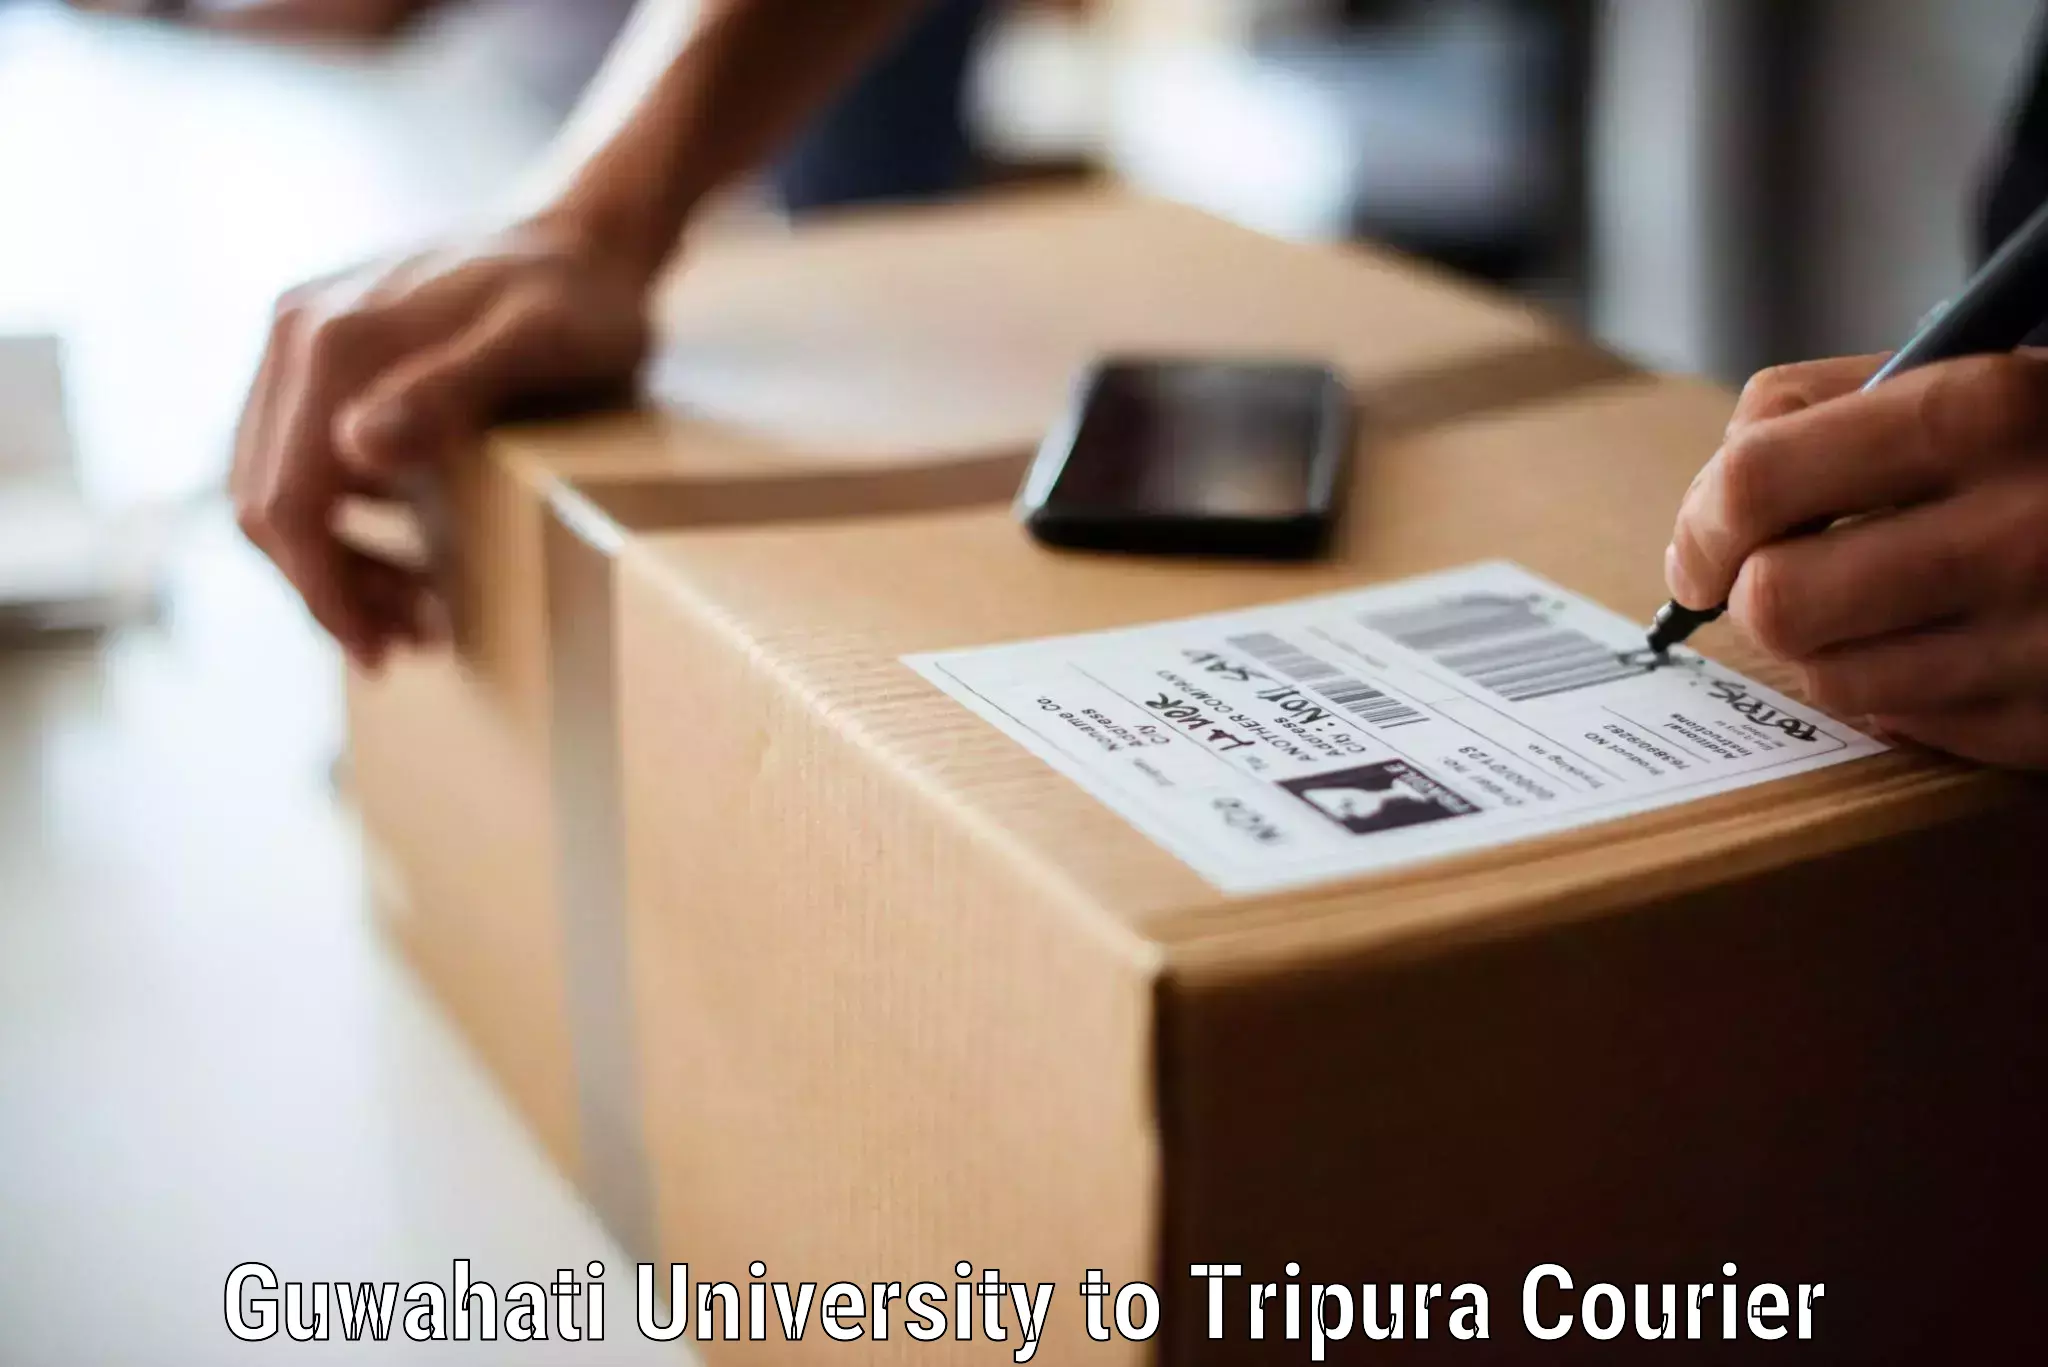 Advanced moving solutions in Guwahati University to Udaipur Tripura